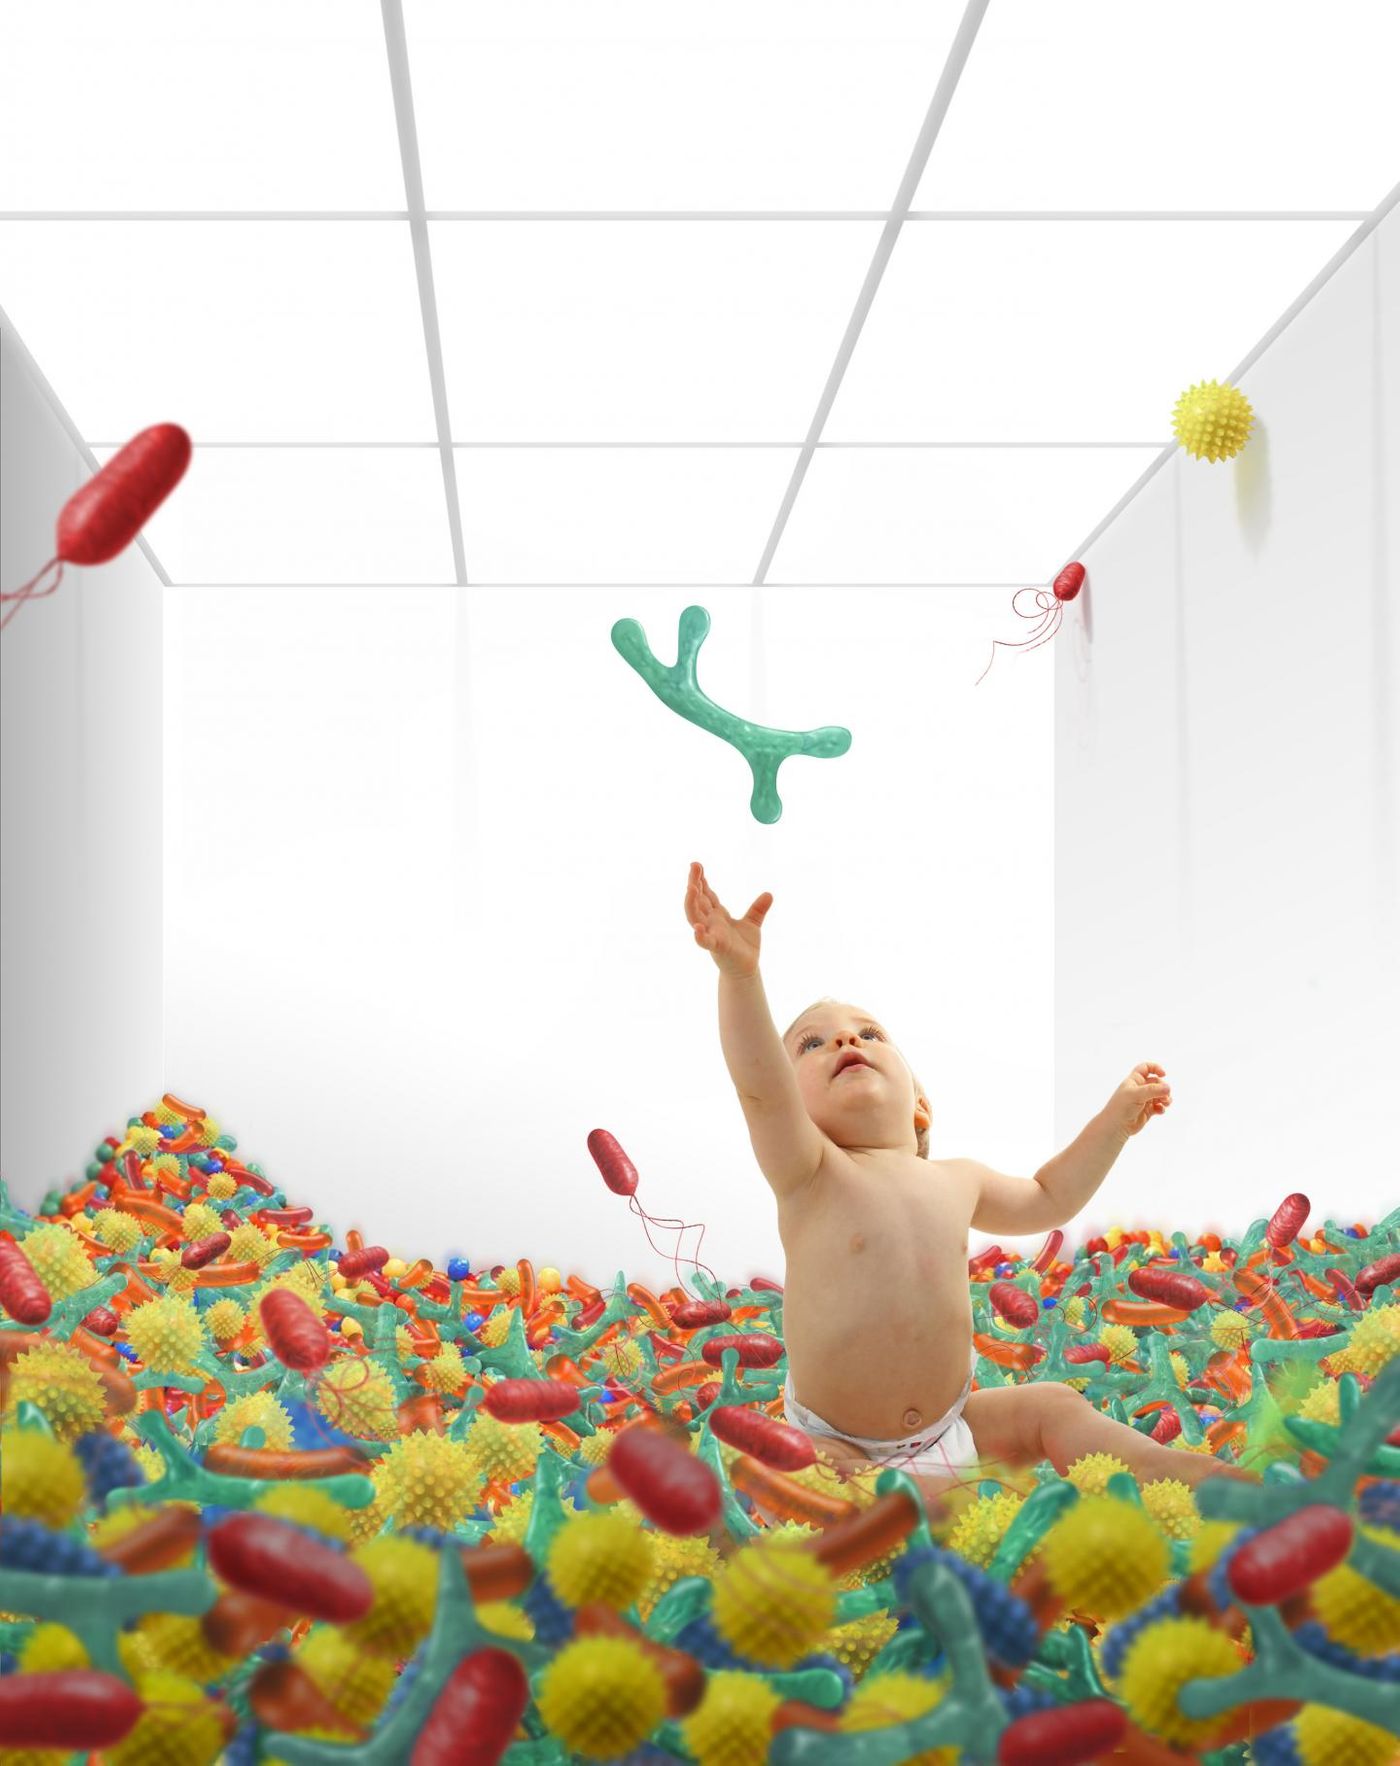 The gut microbiomes of infants have an impact on autoimmunity. / Credit: Aalto University